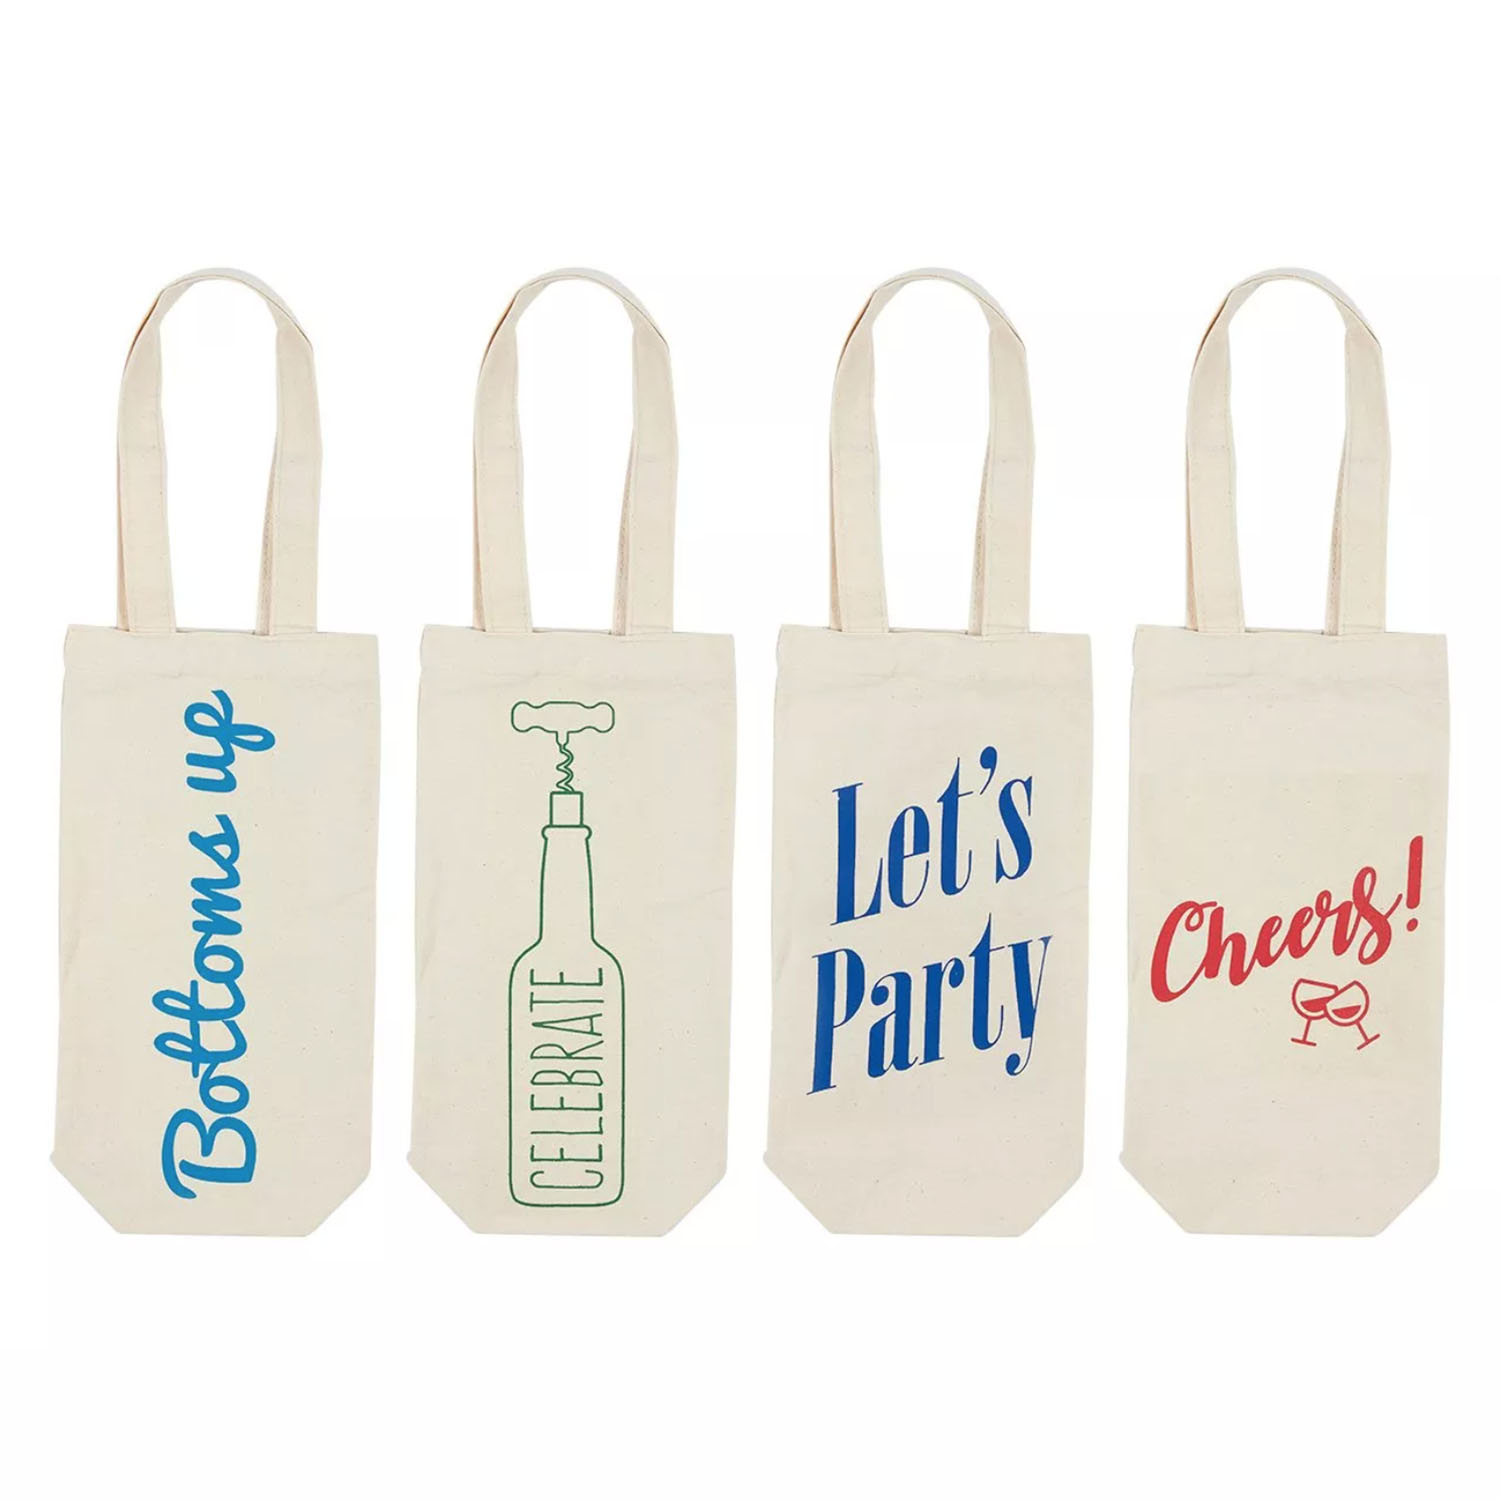 Gift Bags - Design and Print Your Custom Gift Packaging